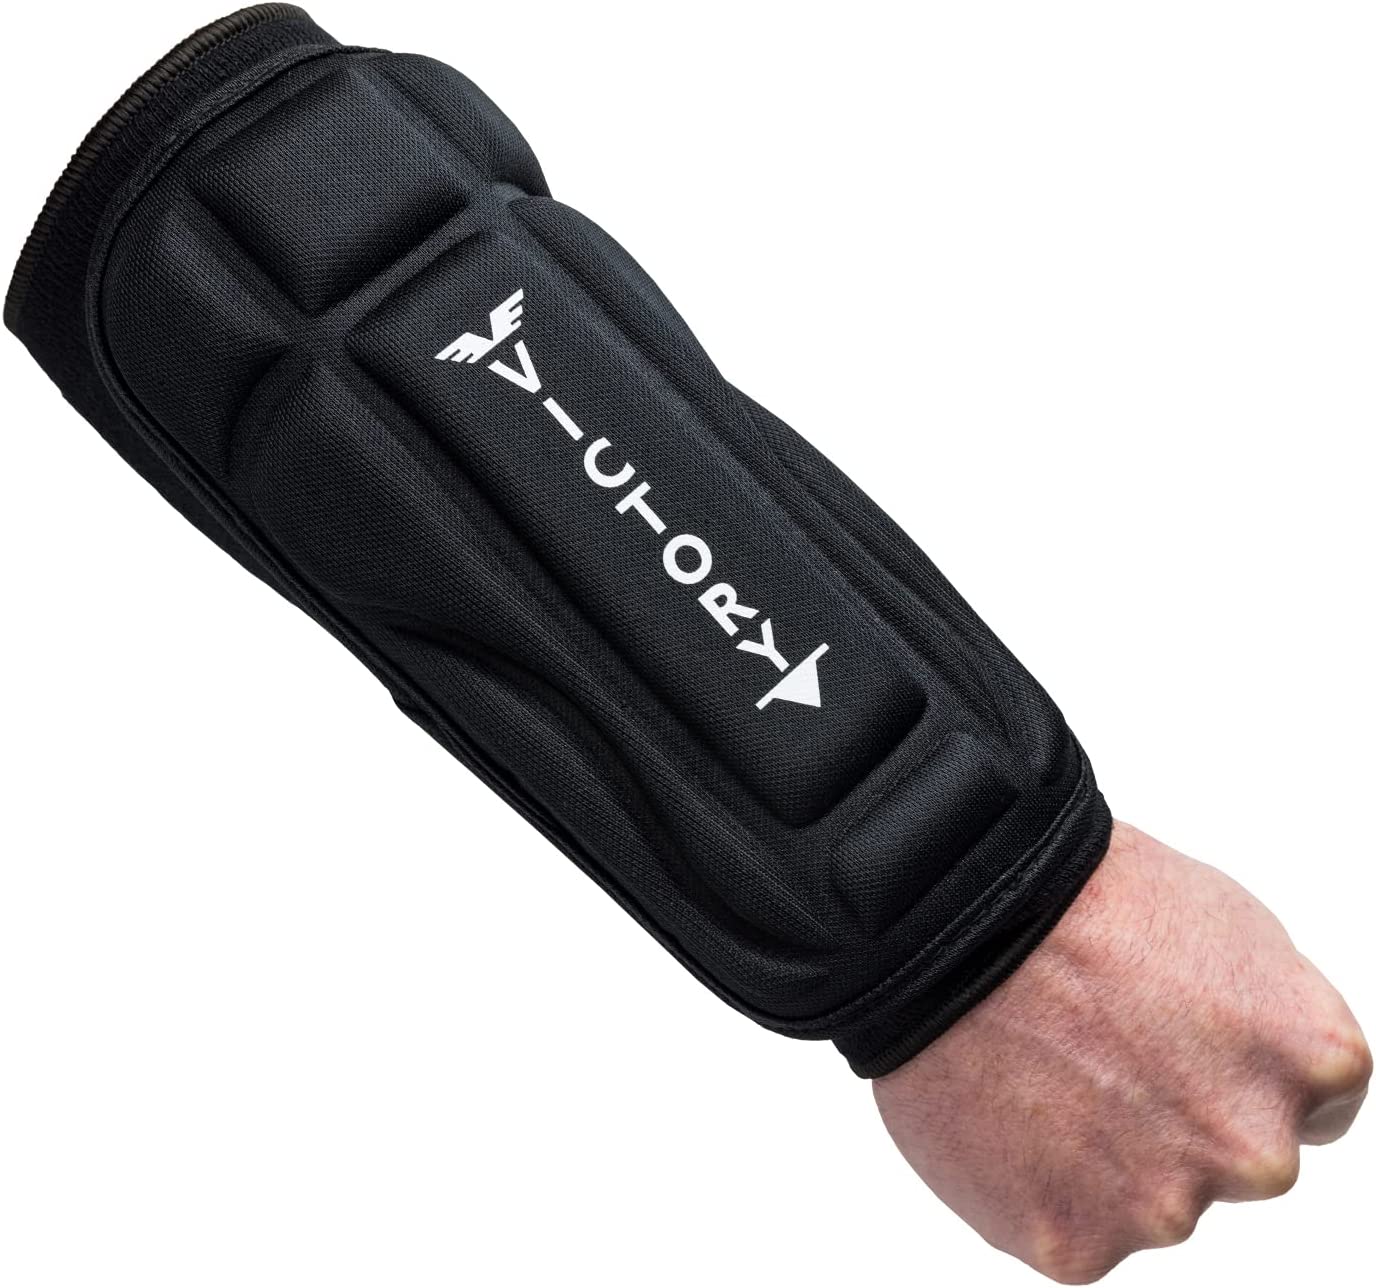 Kickboxing, Muay Thai MMA Martial Arts Forearm Armor Guards for Kids and Adults